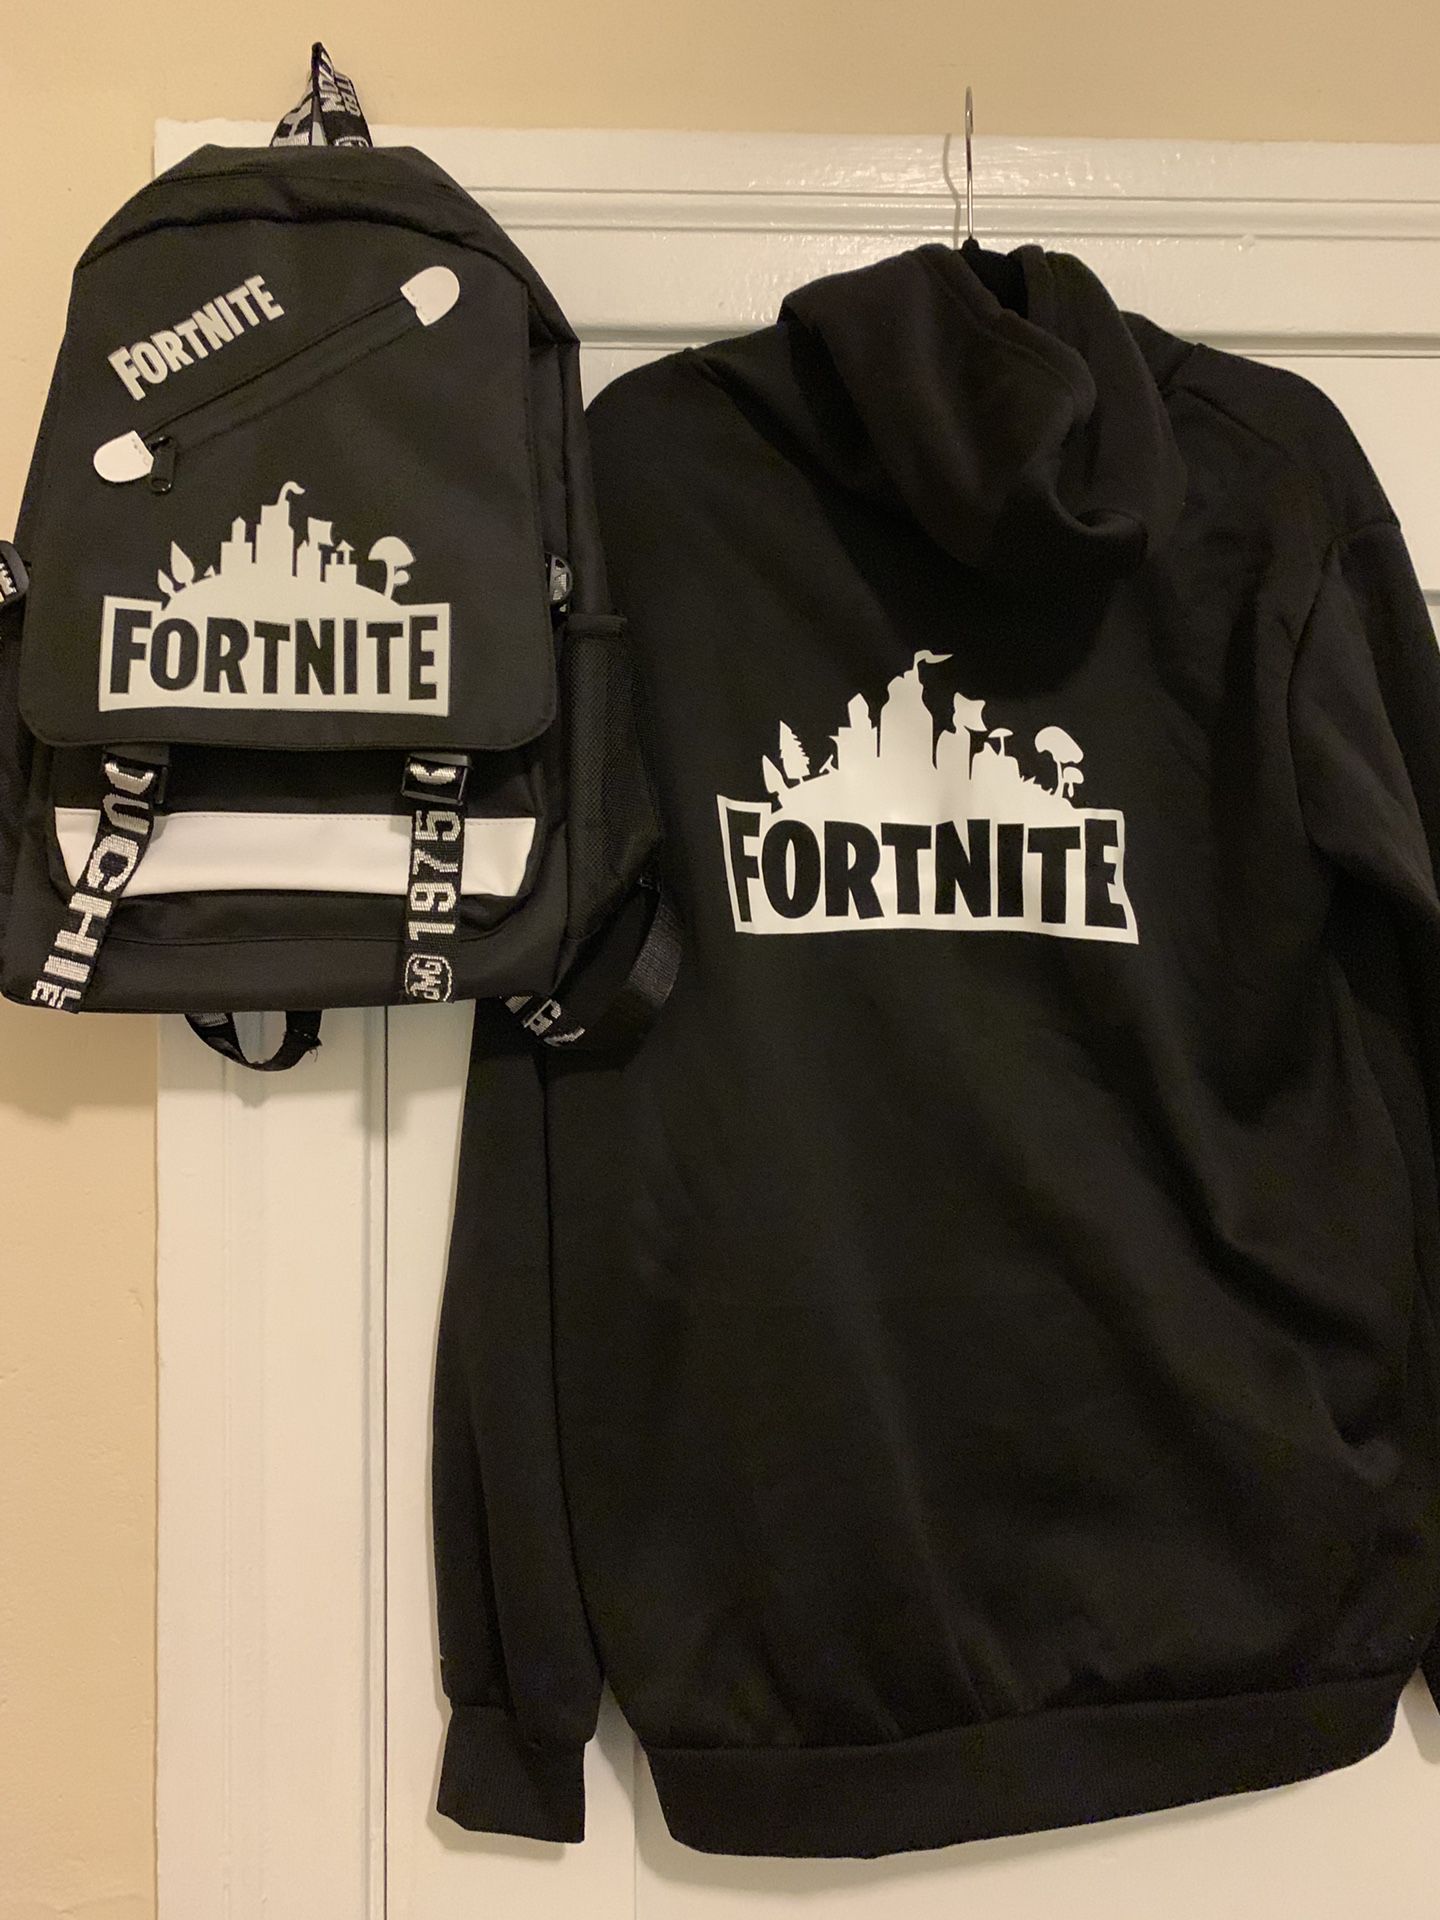 Limited edition fortnite backpack